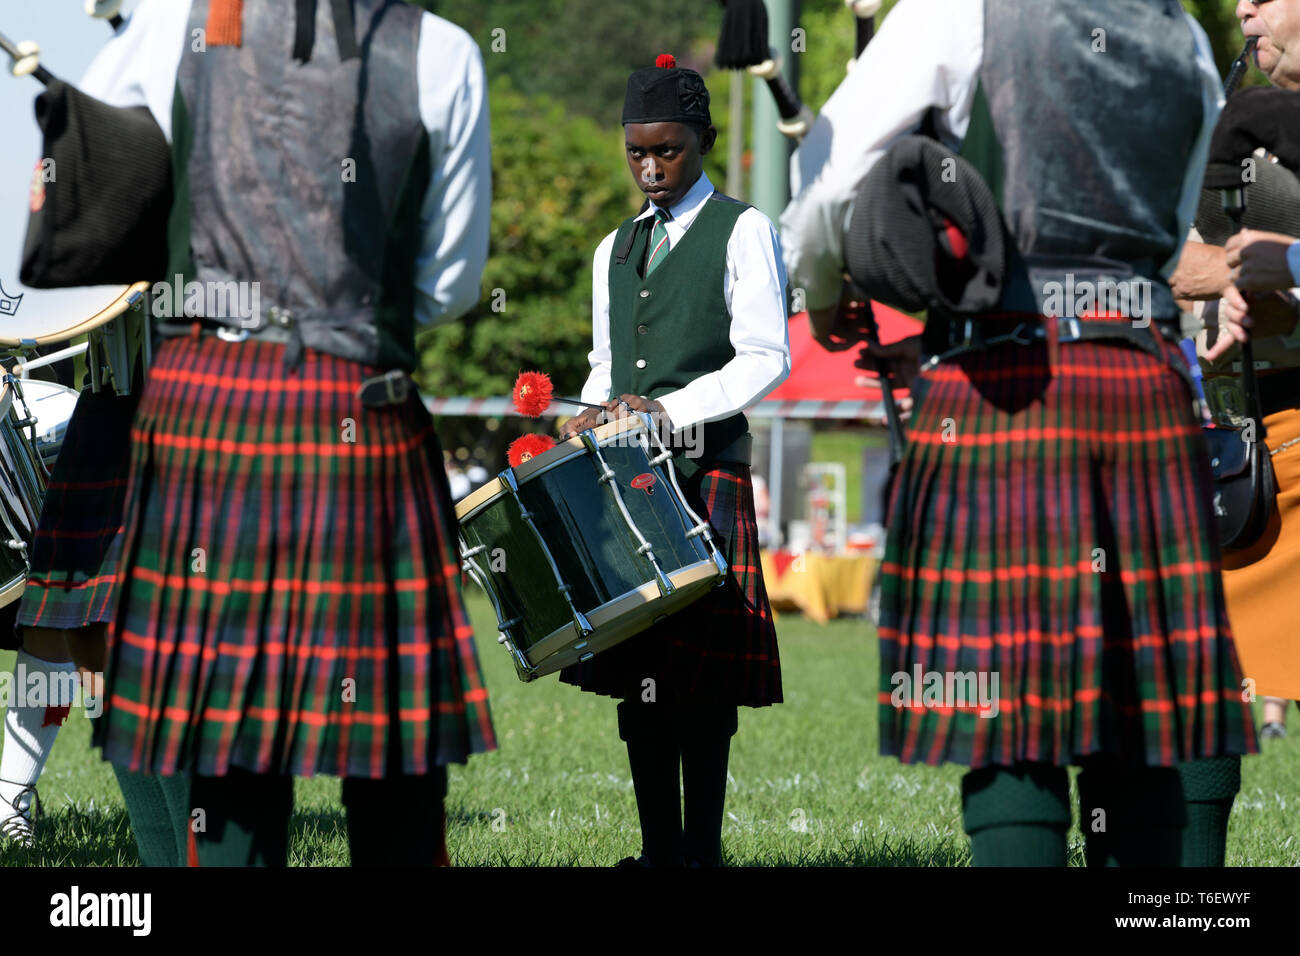 Young man playing drum in pipe band, annual Highland Gathering, 2019, Amanzimtoti, KwaZulu-Natal, South Africa, people, bagpipes, kilts, standing Stock Photo